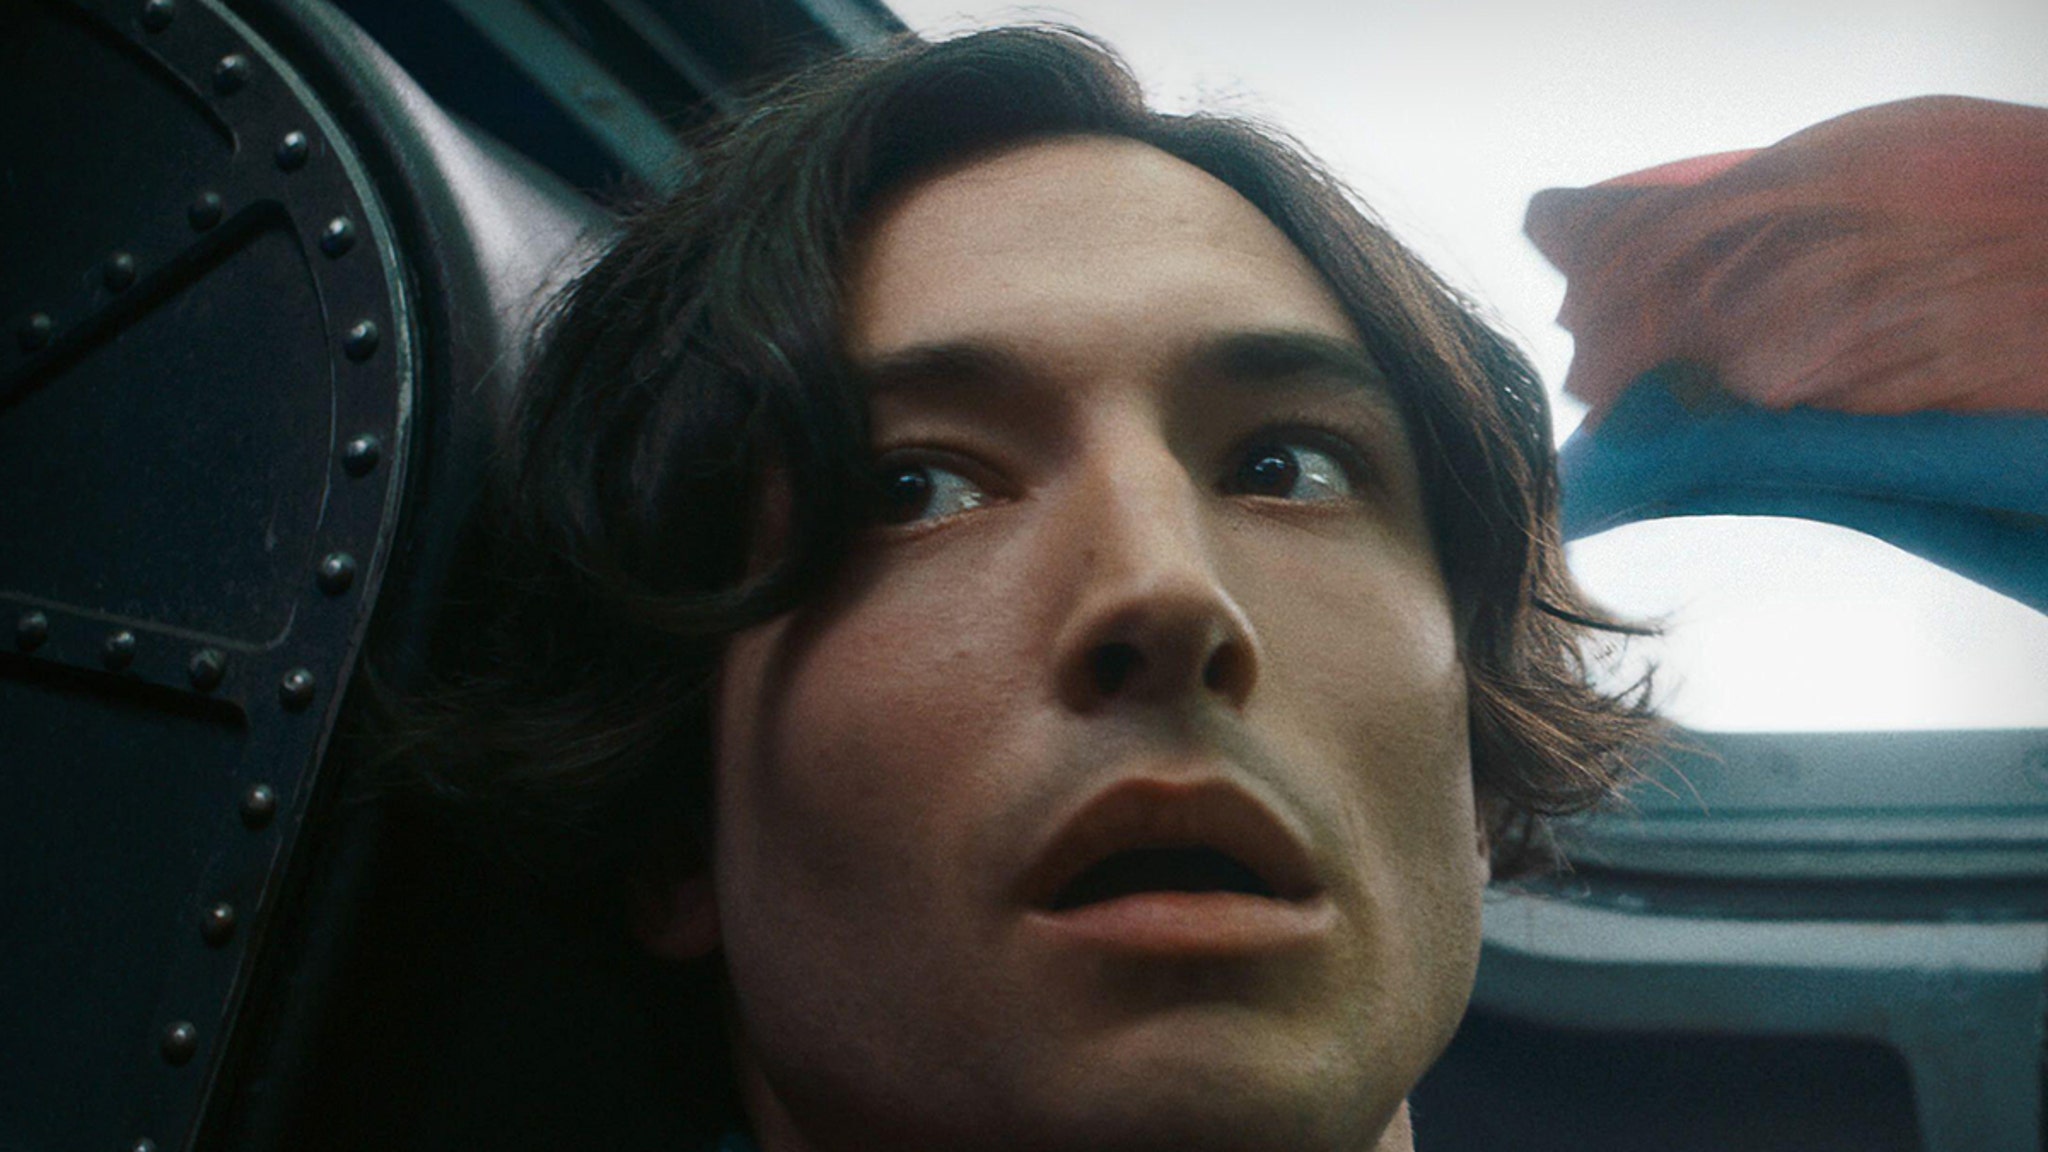 Ezra Miller’s ‘The Flash’ Off to Slow Start at Box Office Despite Hype